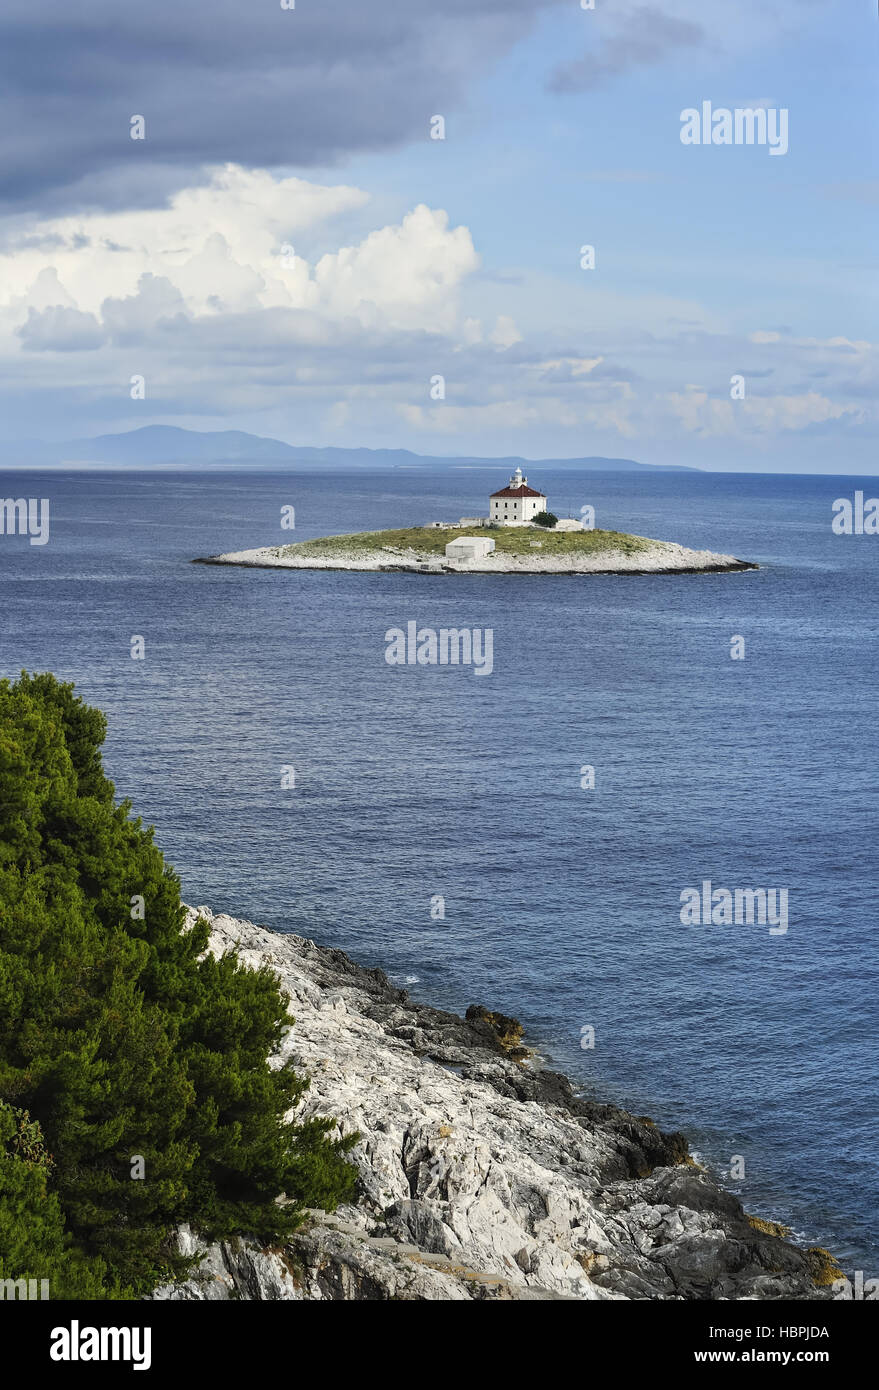 Island with lighthouse in the sea Stock Photo